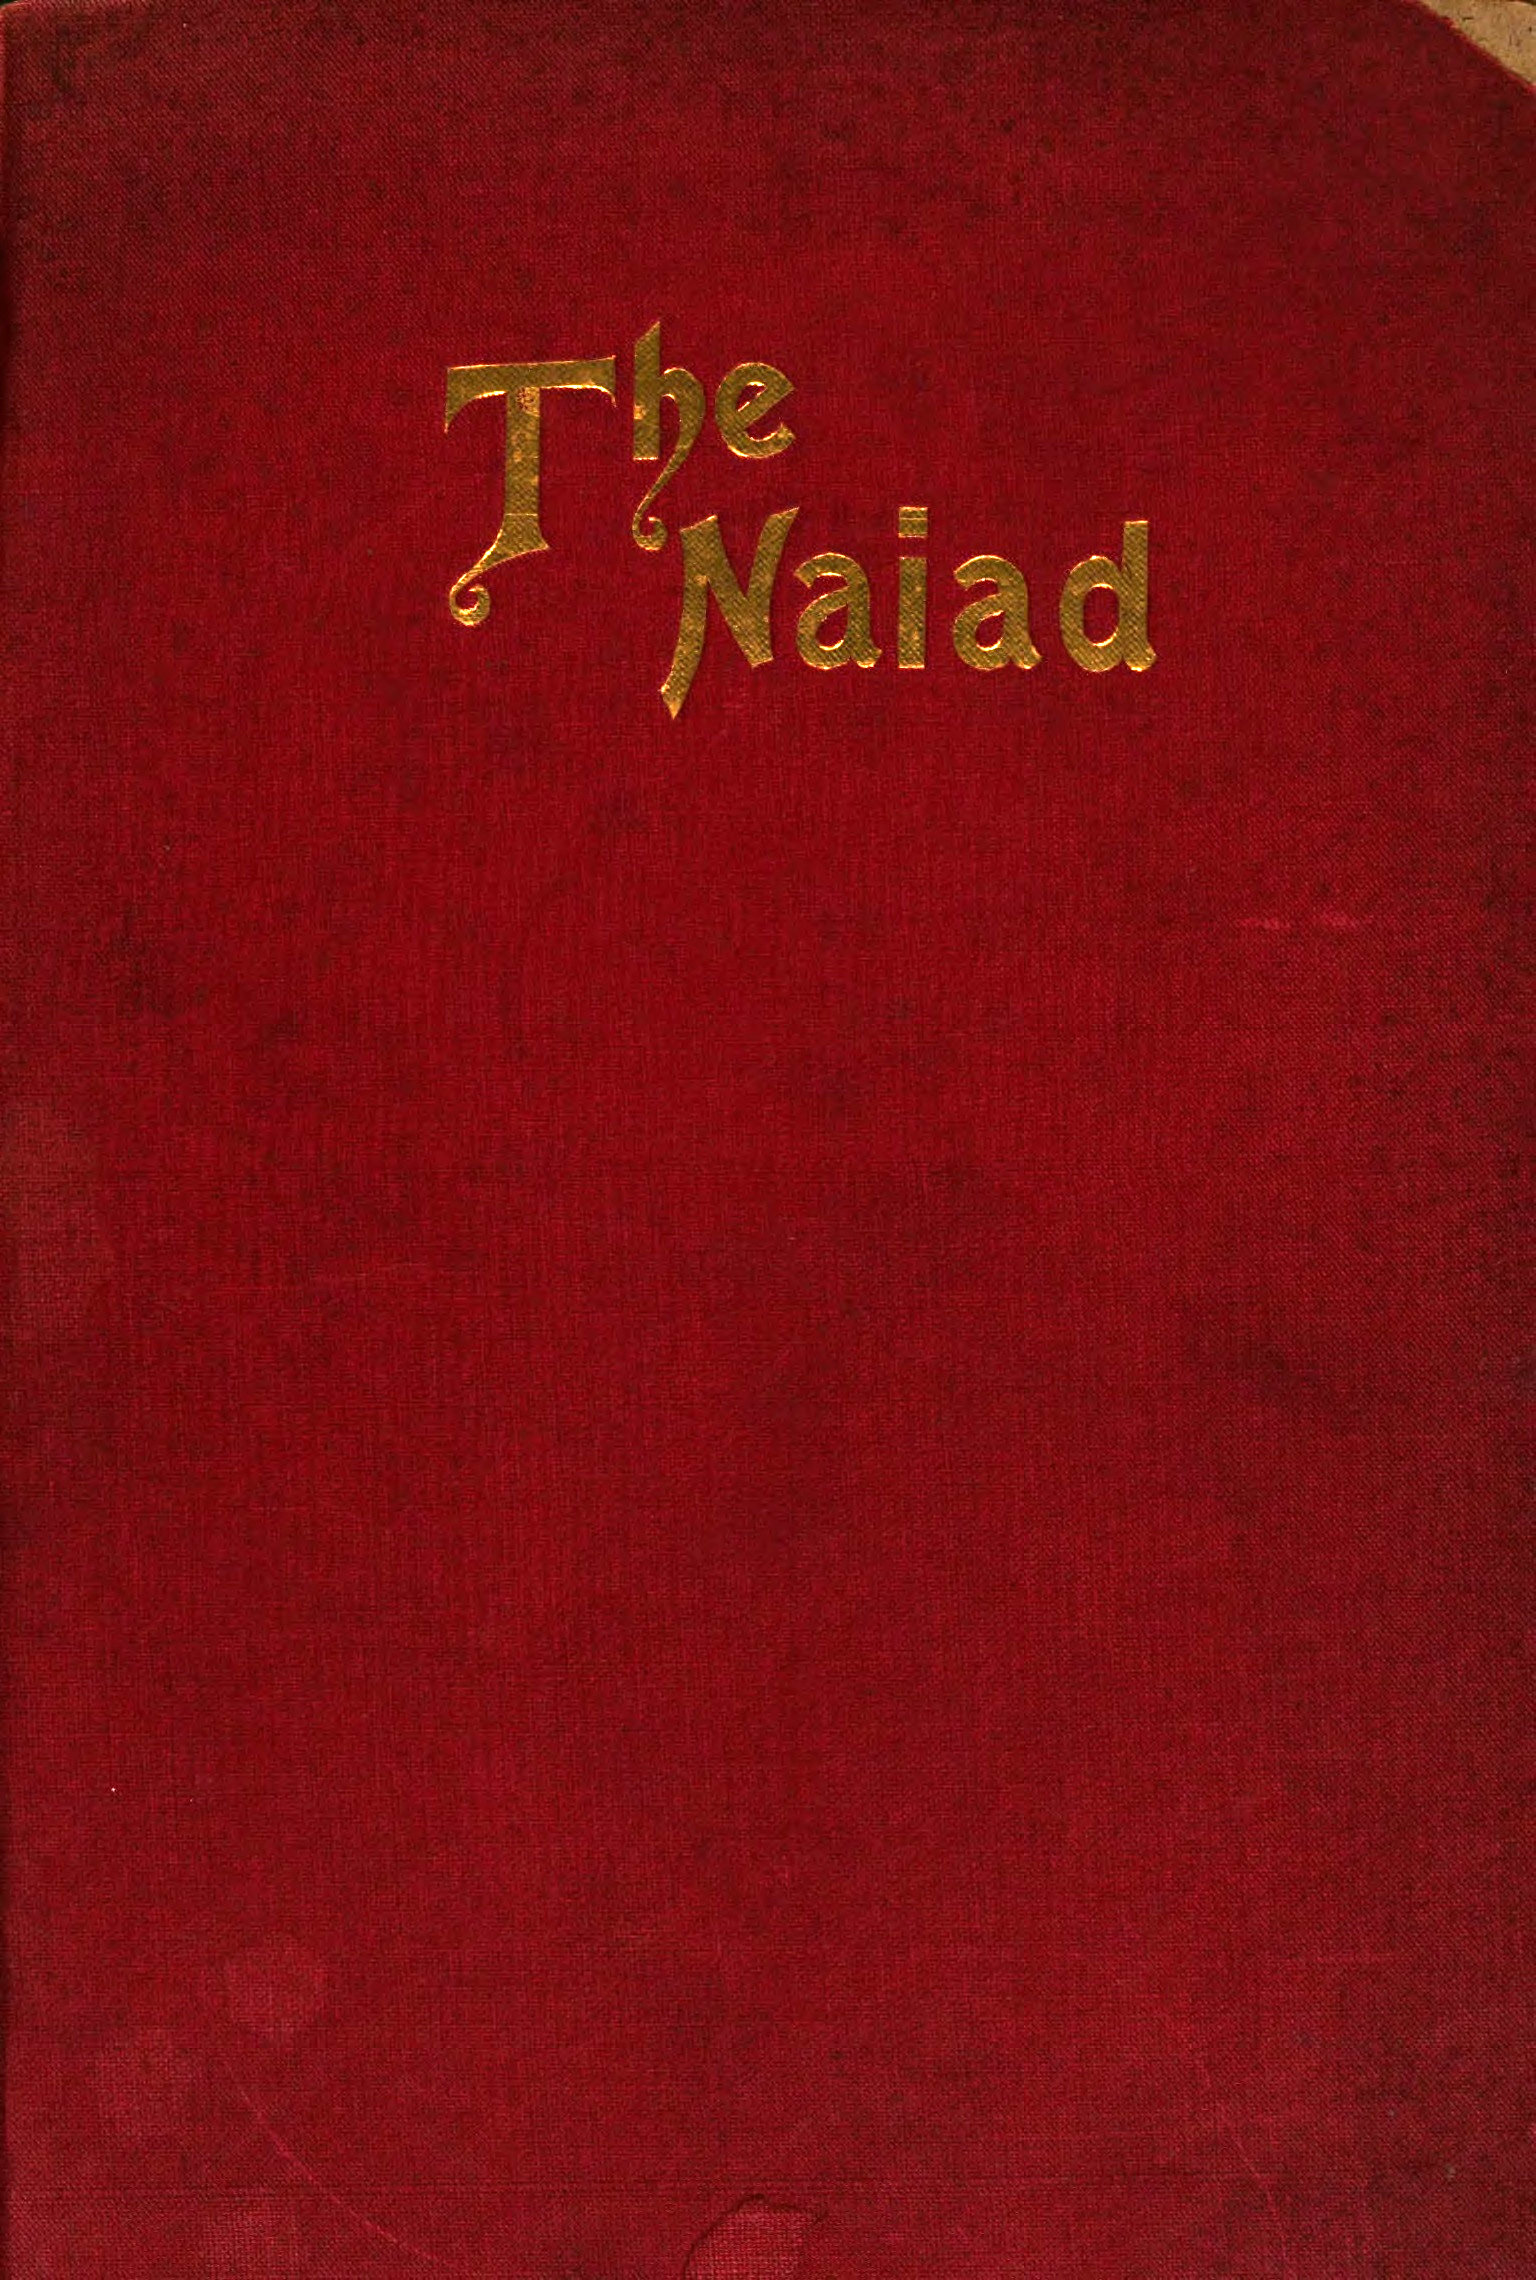 The Naiad: A ghost story